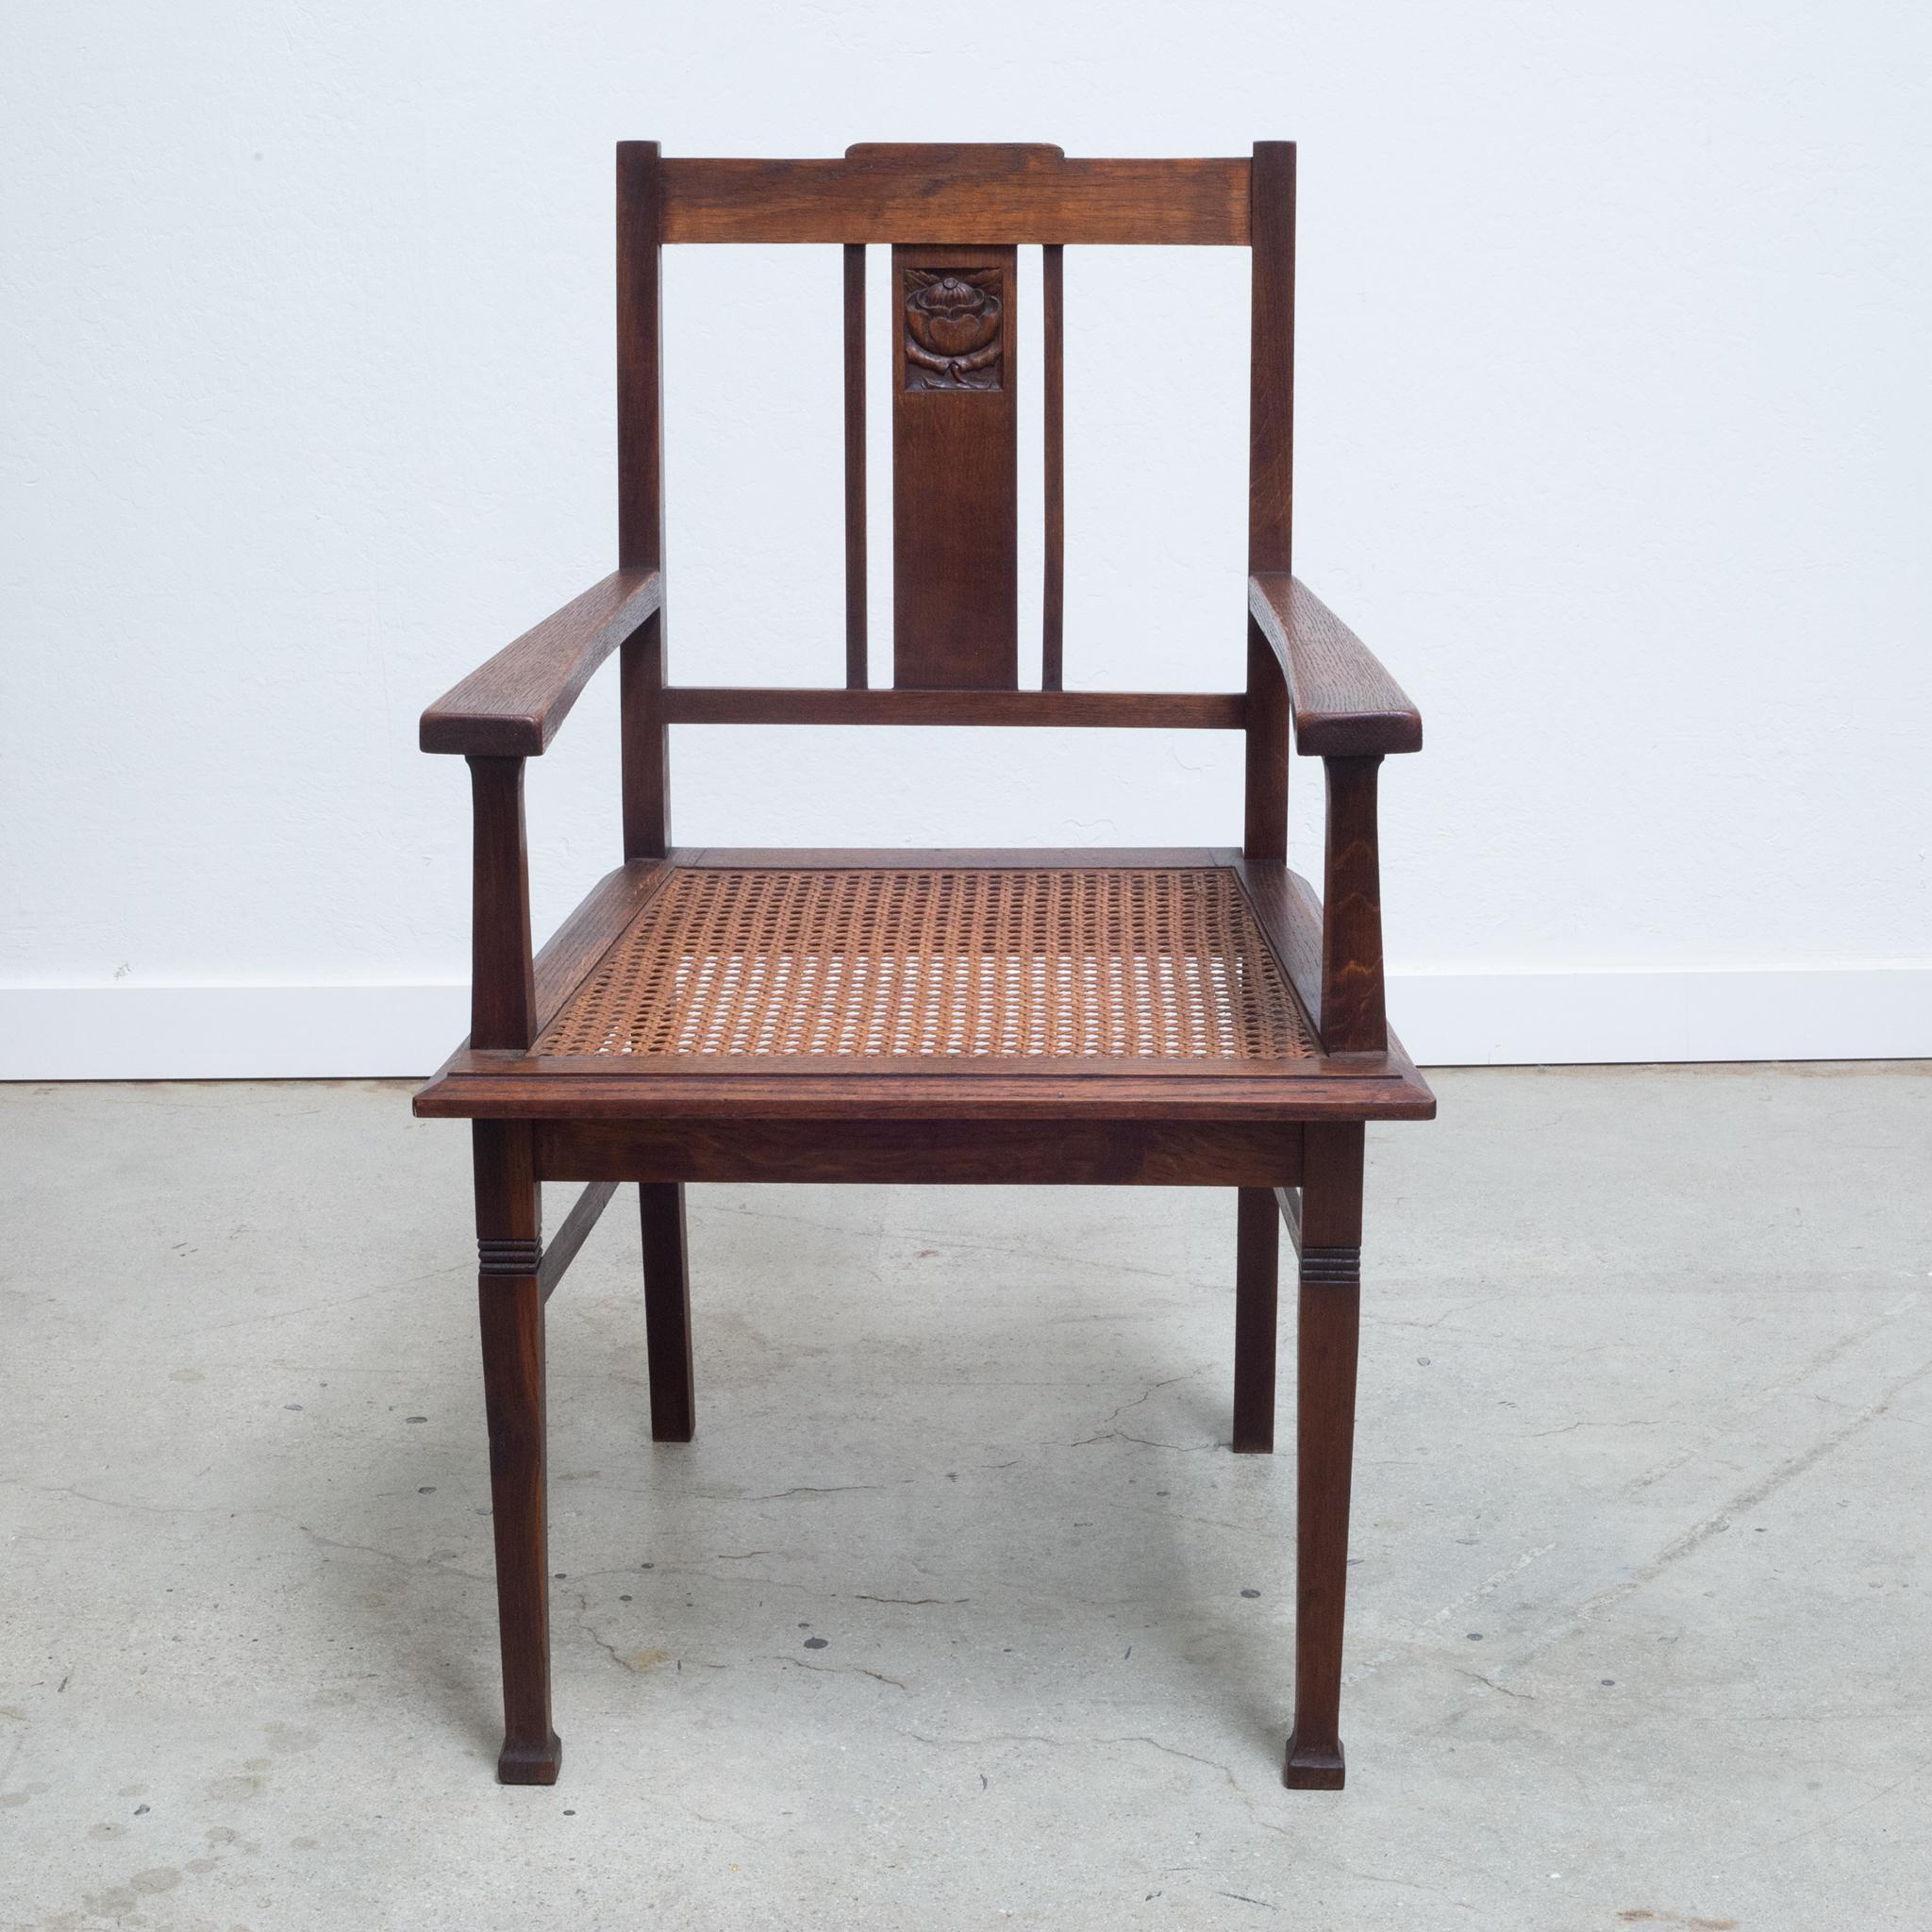 Glasgow Style Arts and Crafts caned oak arm chair with carved motif on the back and legs. Flared feet in the front. c.1900
Scottish school -- Wylie and Lochhead/ E.A. Taylor attributed.

Contact us for more shipping options: S16 Home San Francisco
 